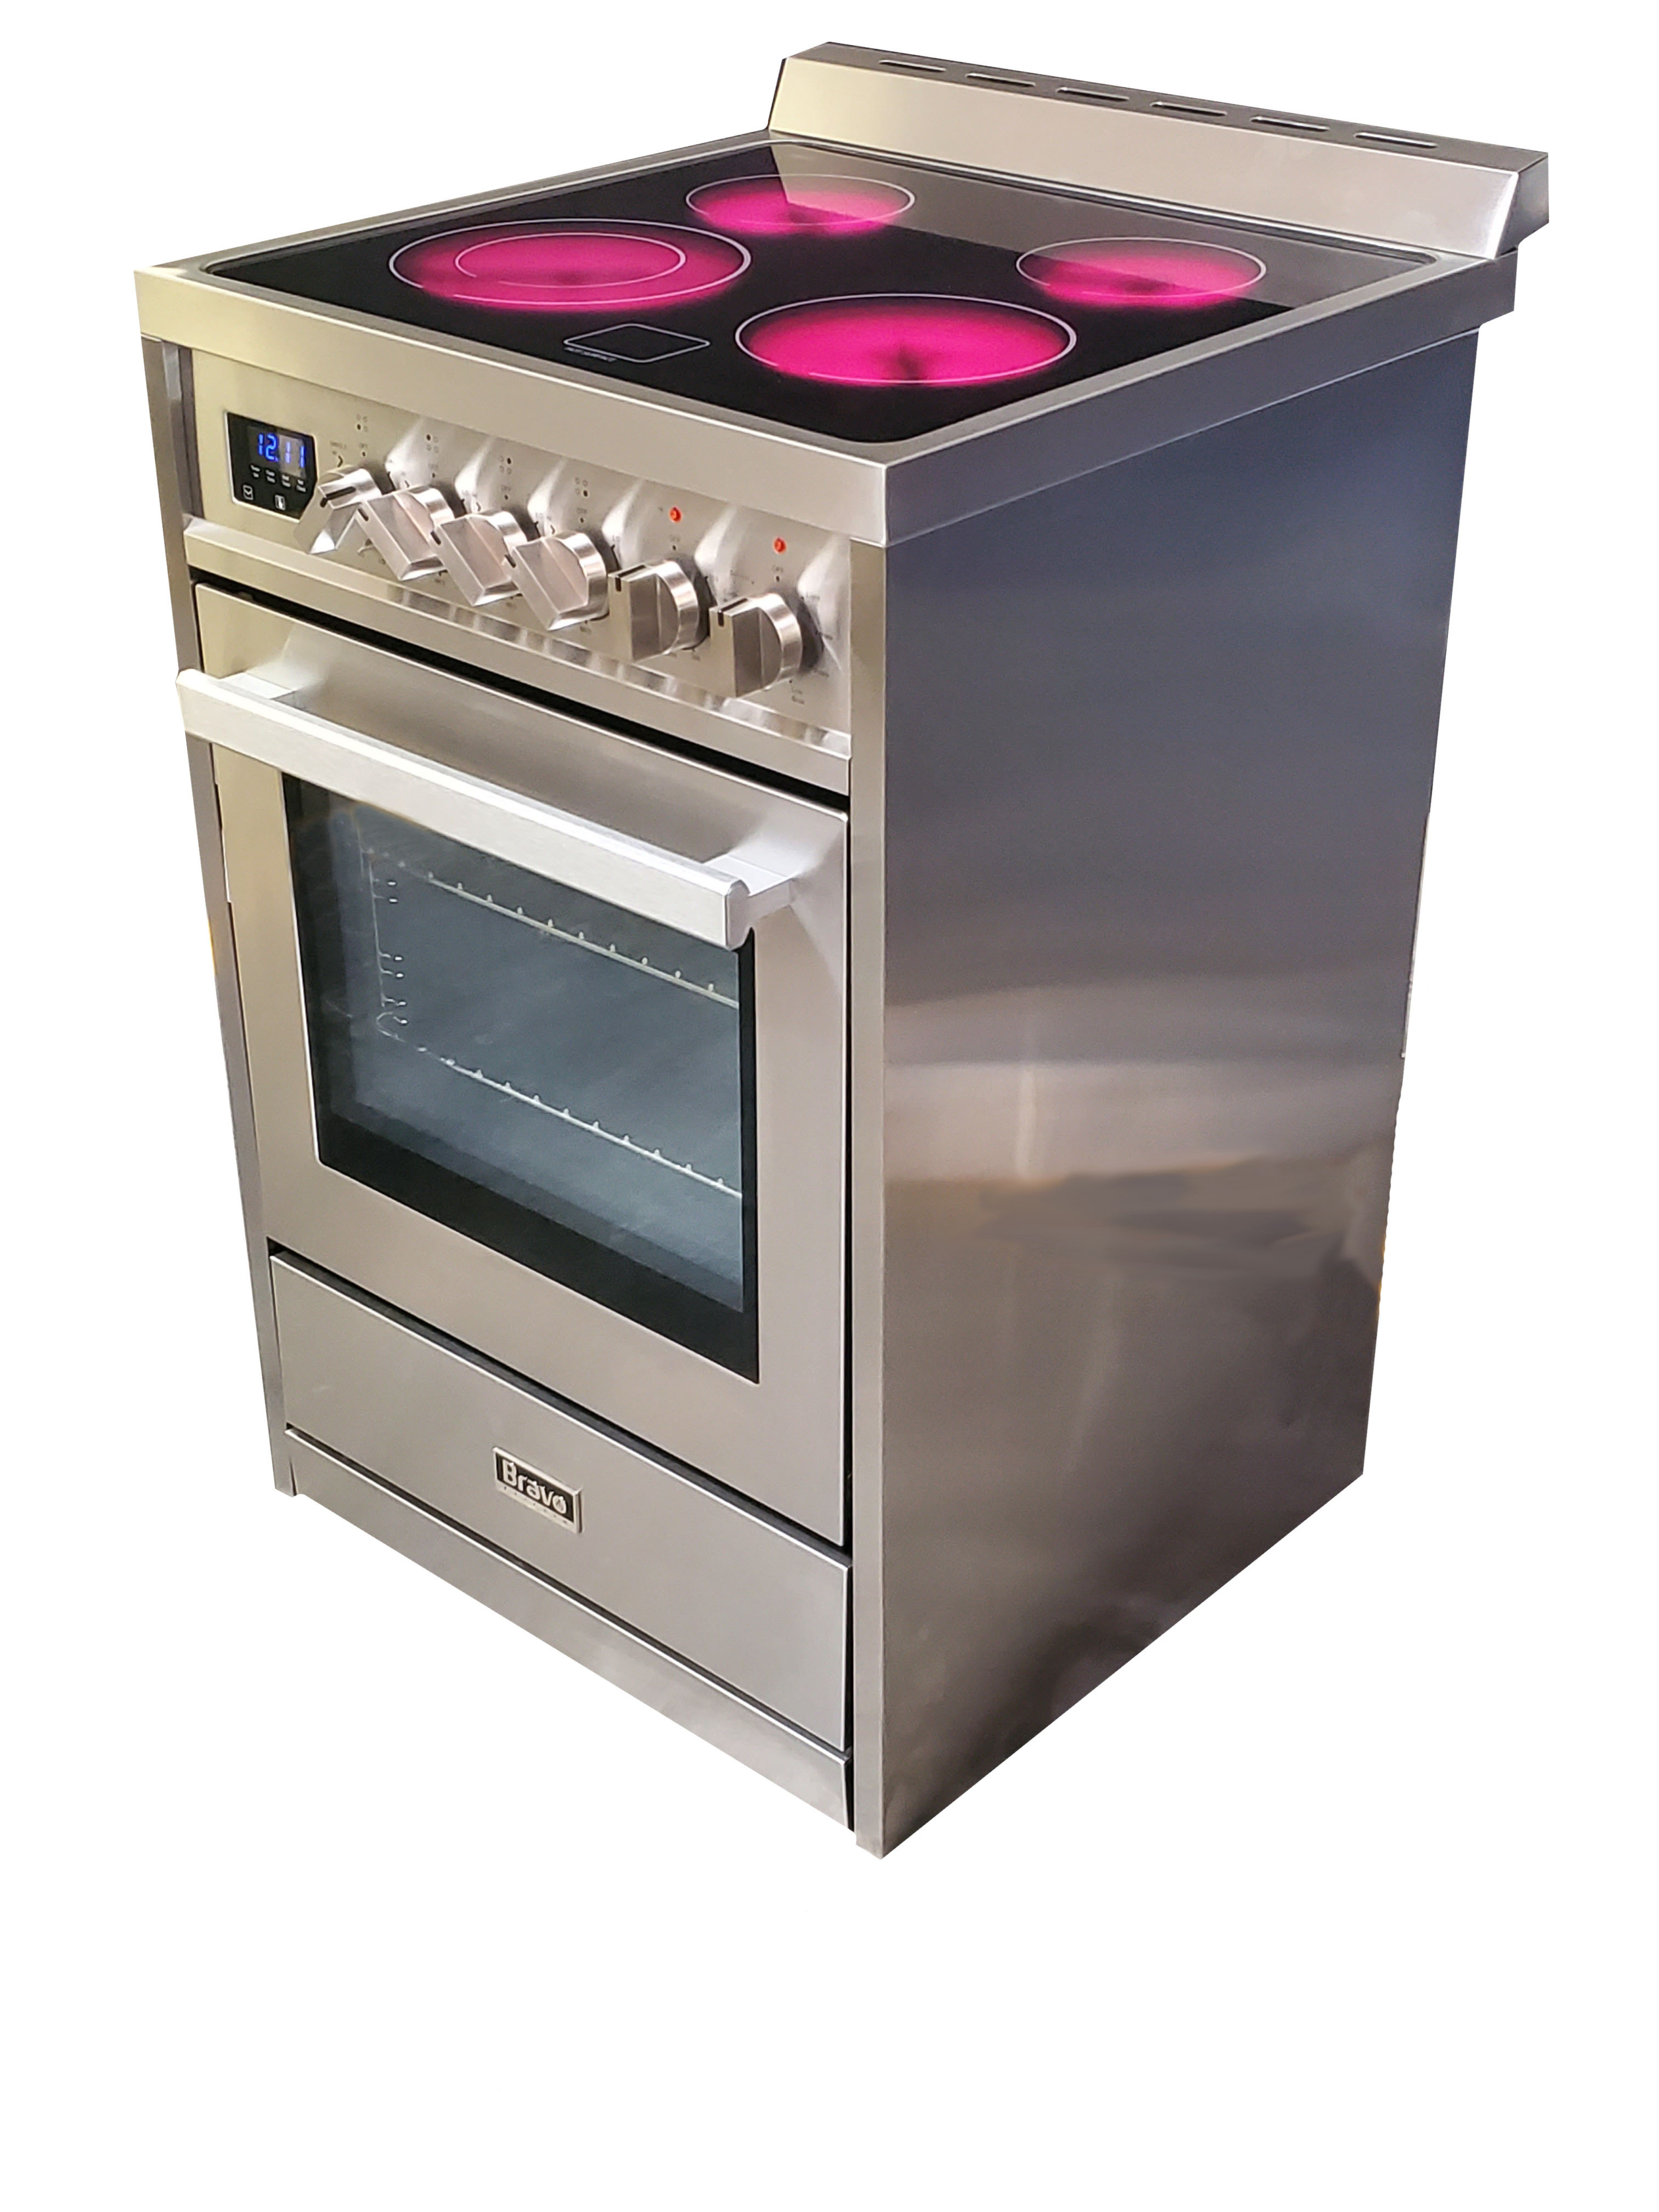 BRAVO KITCHEN 24 2 Cubic Feet Electric Freestanding Range with Radiant  Cooktop